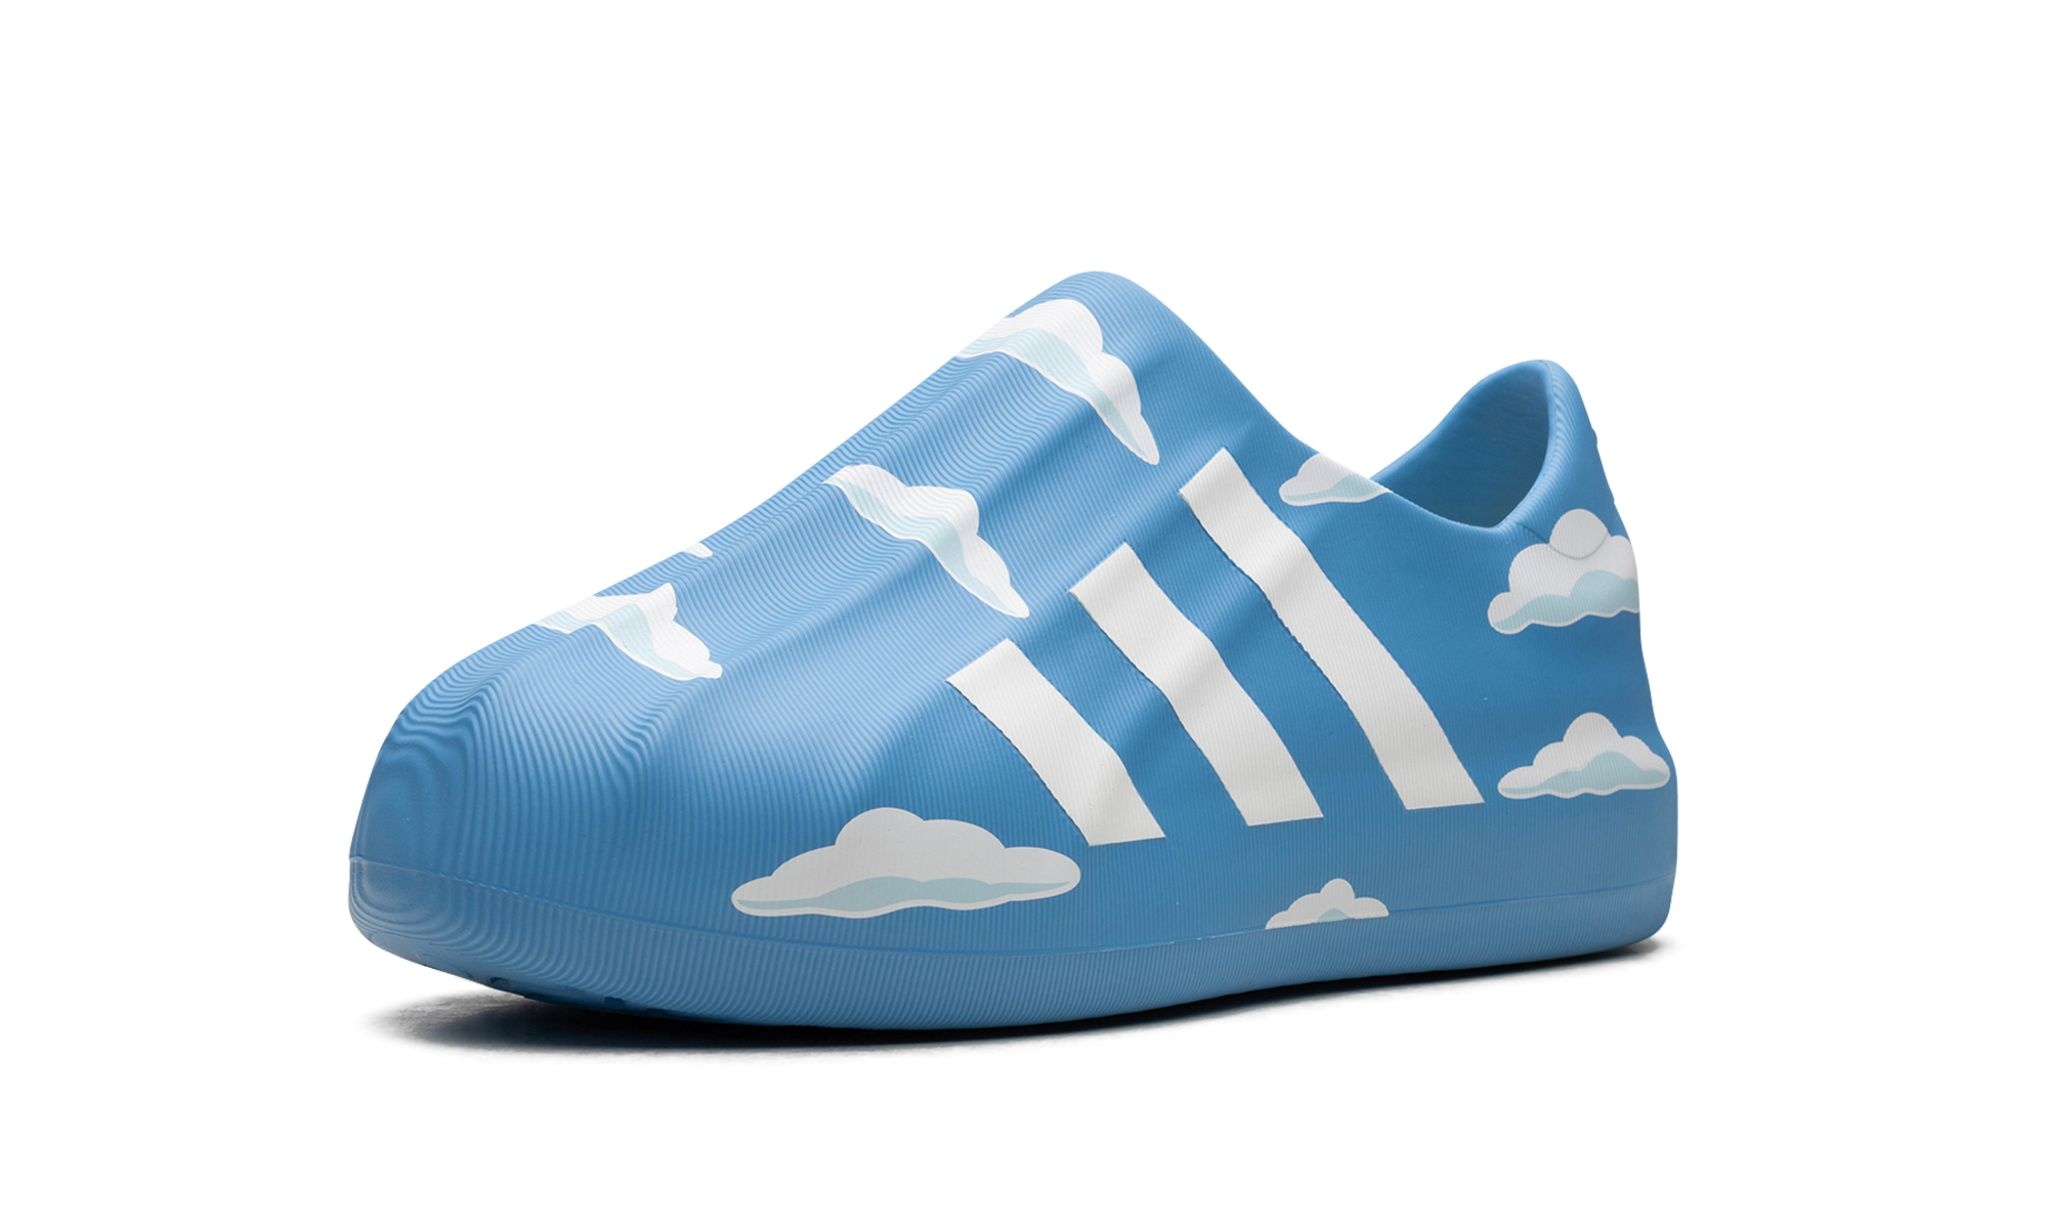 adiFOM Superstar Low "The Simpsons - Clouds" - 4